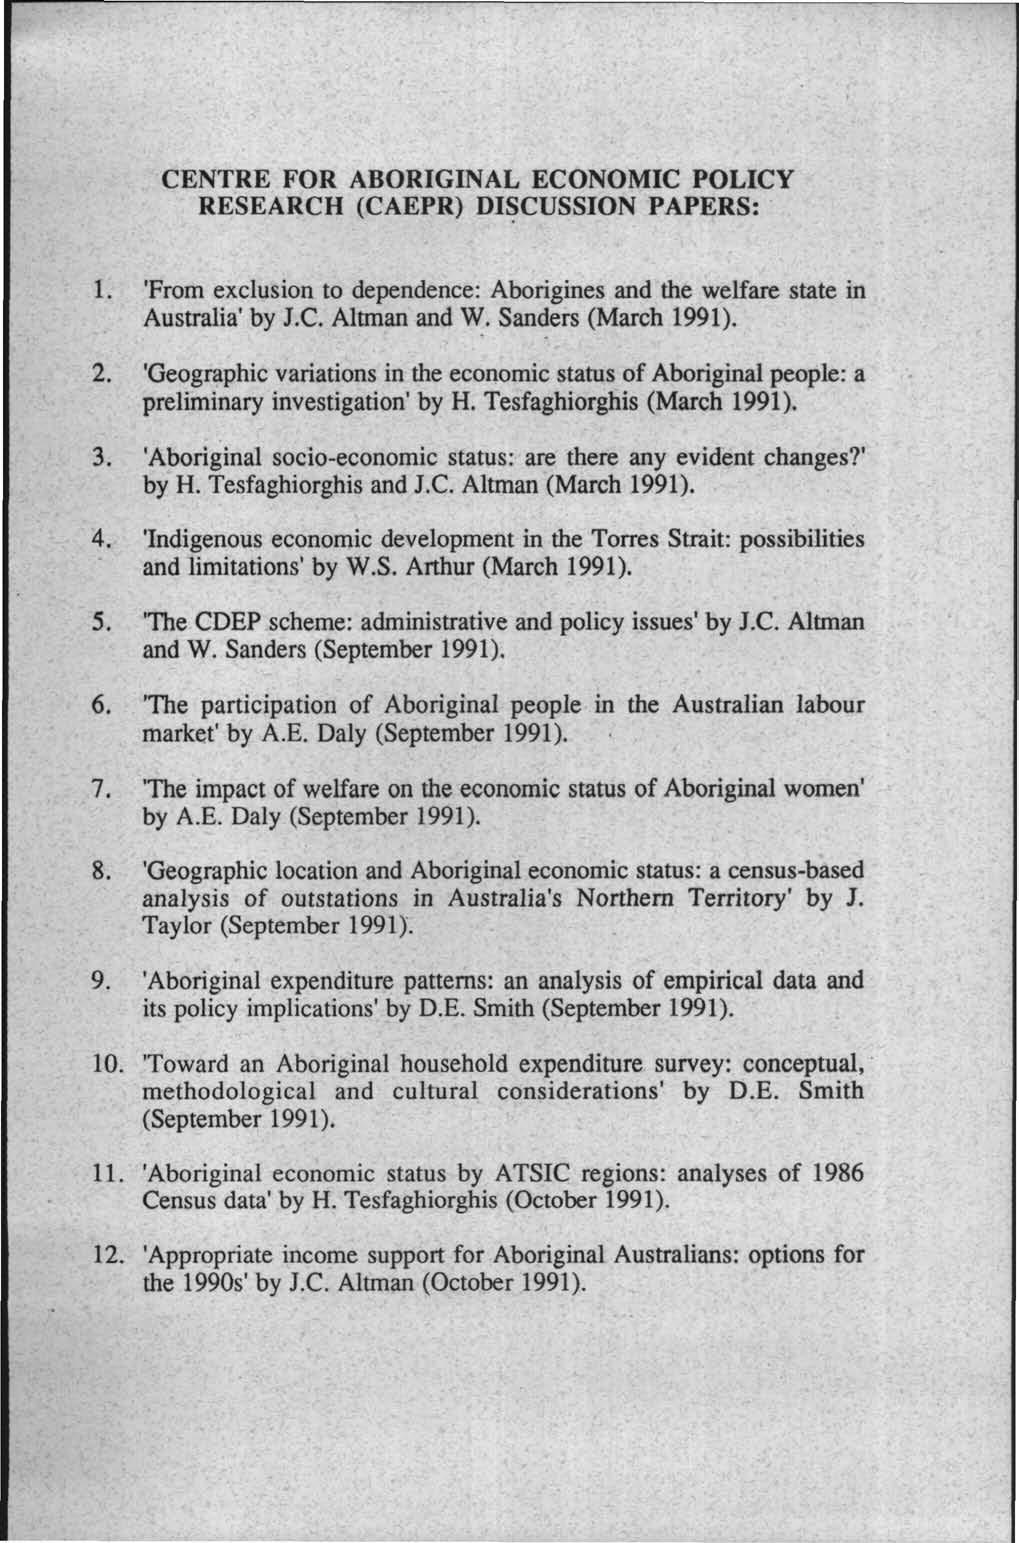 CENTRE FOR ABORIGINAL ECONOMIC POLICY RESEARCH (CAEPR) DISCUSSION PAPERS: 1. 'From exclusion to dependence: Aborigines and the welfare state in Australia 1 by J.C. Altman and W. Sanders (March 1991).